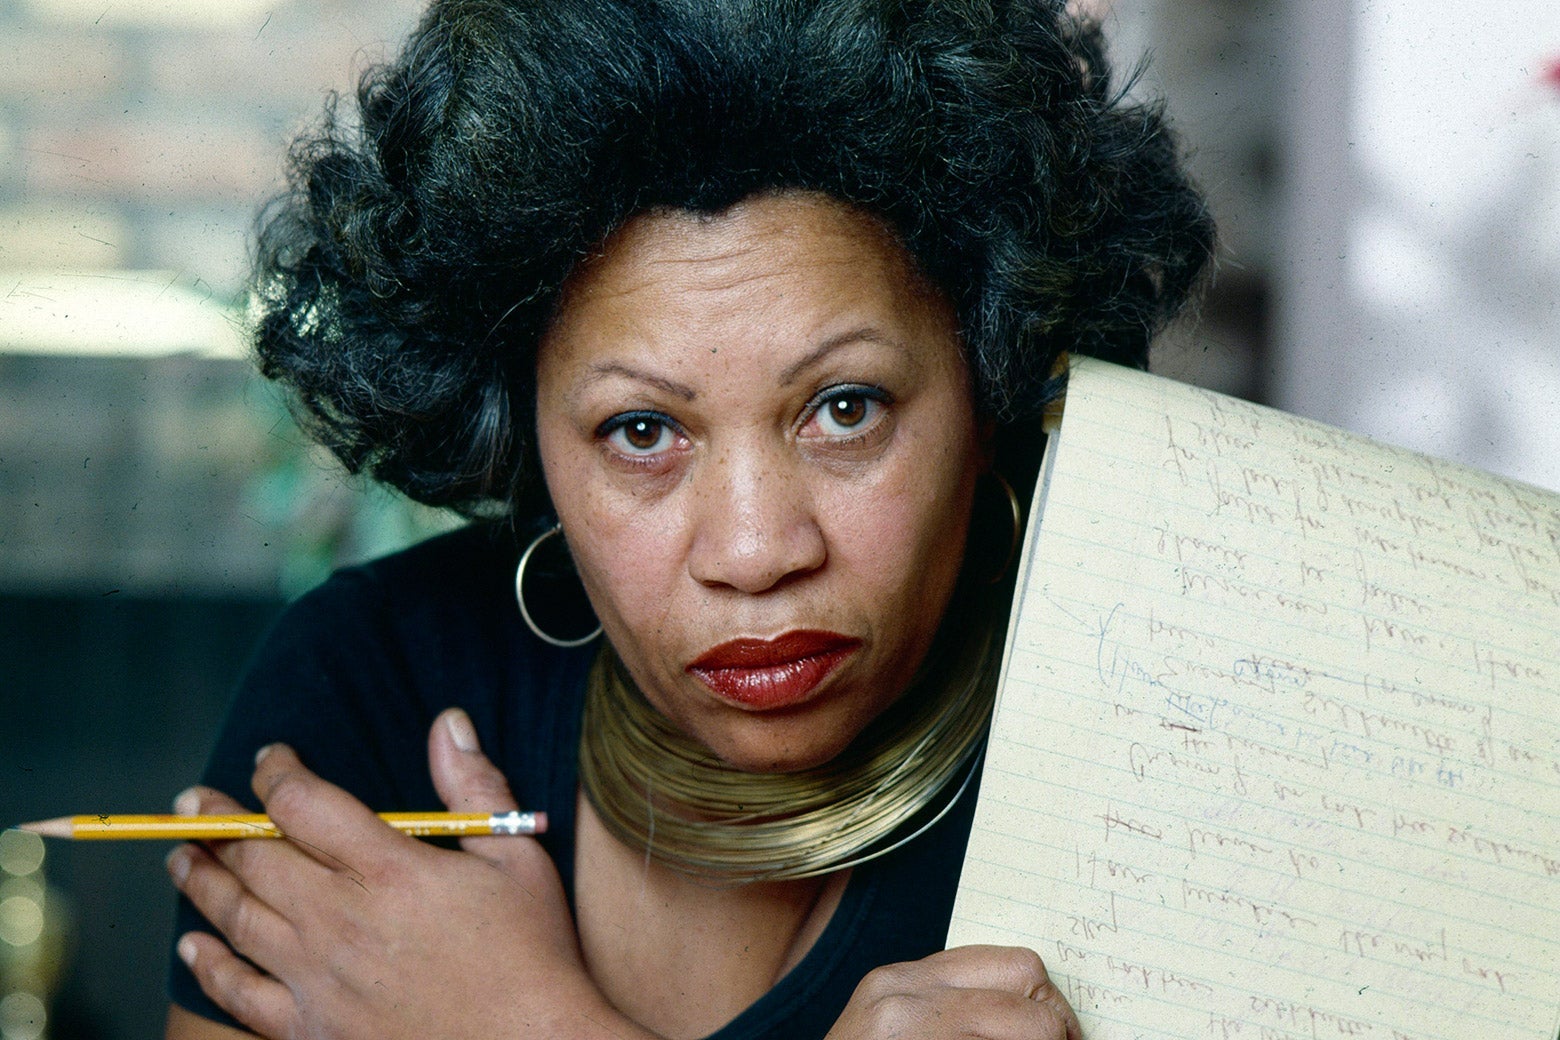 Toni Morrison holds a legal pad and pencil.